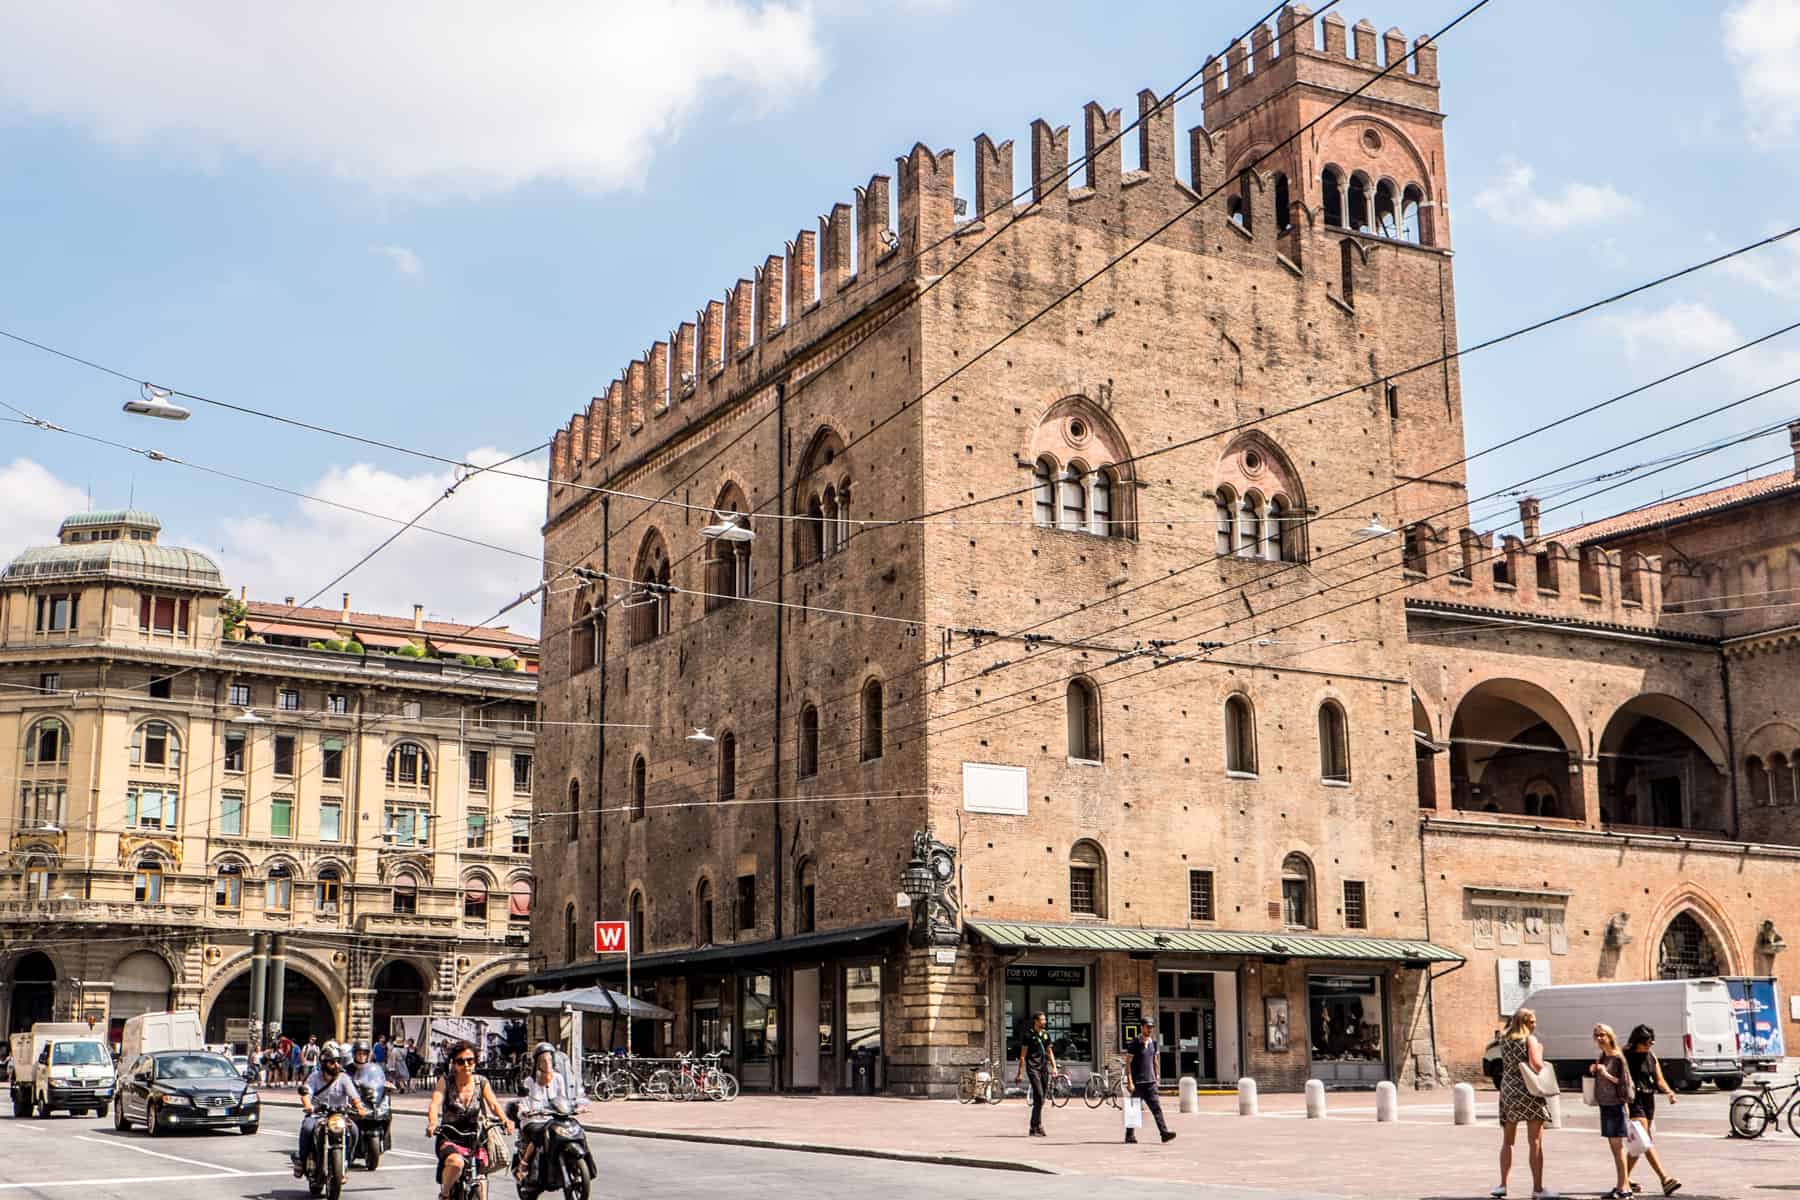 The brown stone, castle-like building next to a main road, is one of the main medieval structures in Piazza Nettuno in Bologna, Italy. 